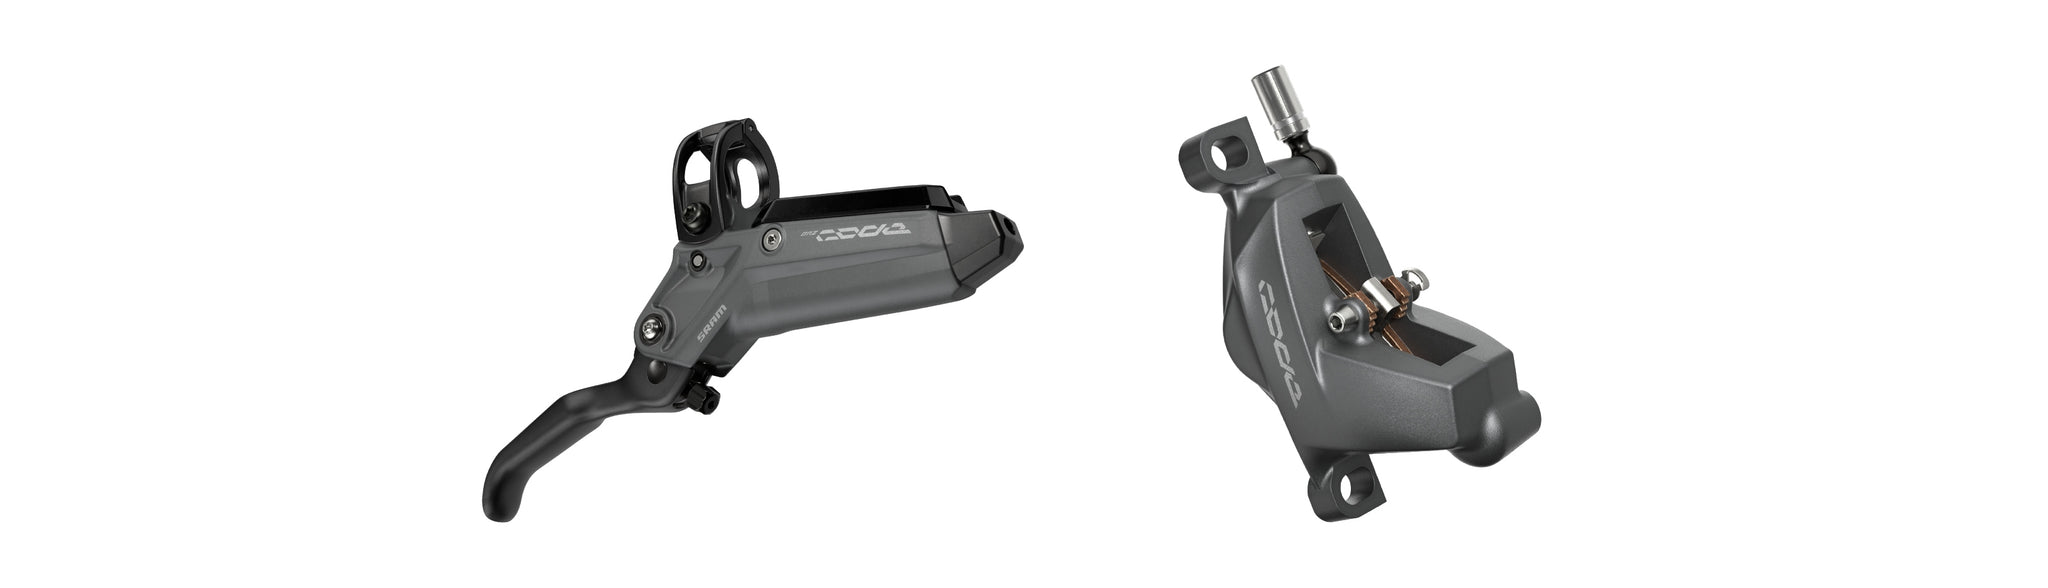 SRAM Code Bronze Stealth brake first look and review